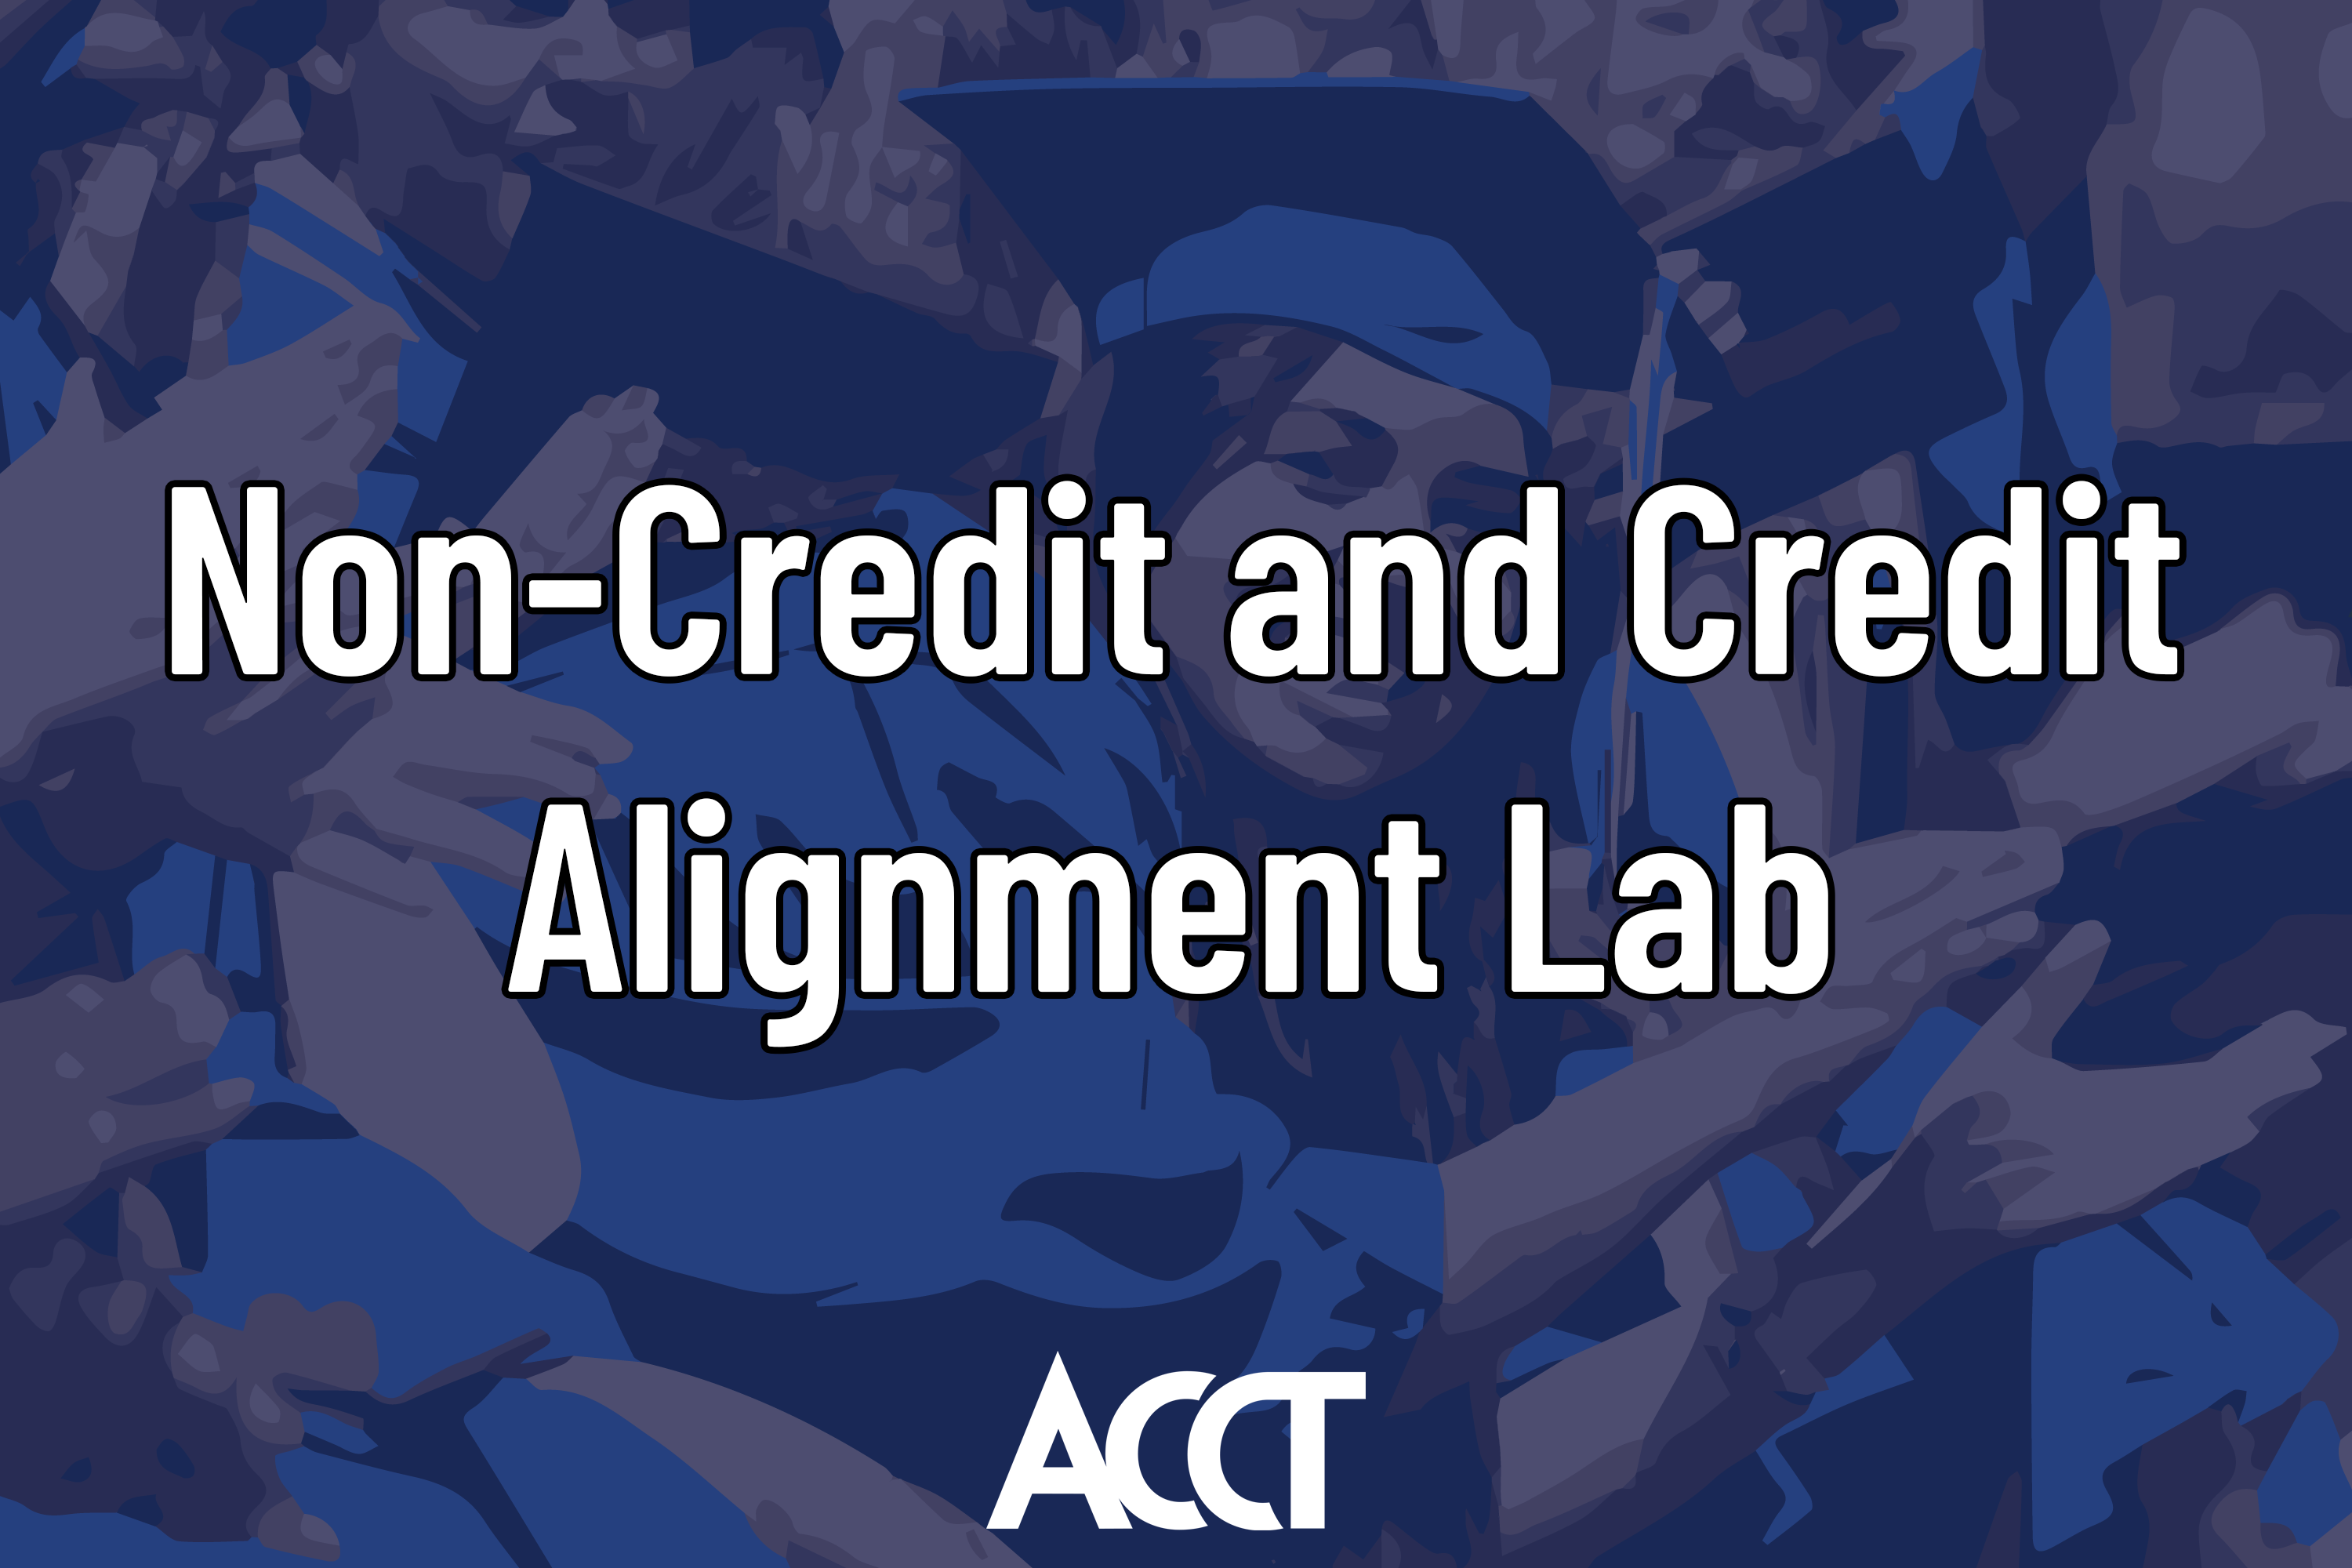 Non-Credit and Credit Alignment Lab